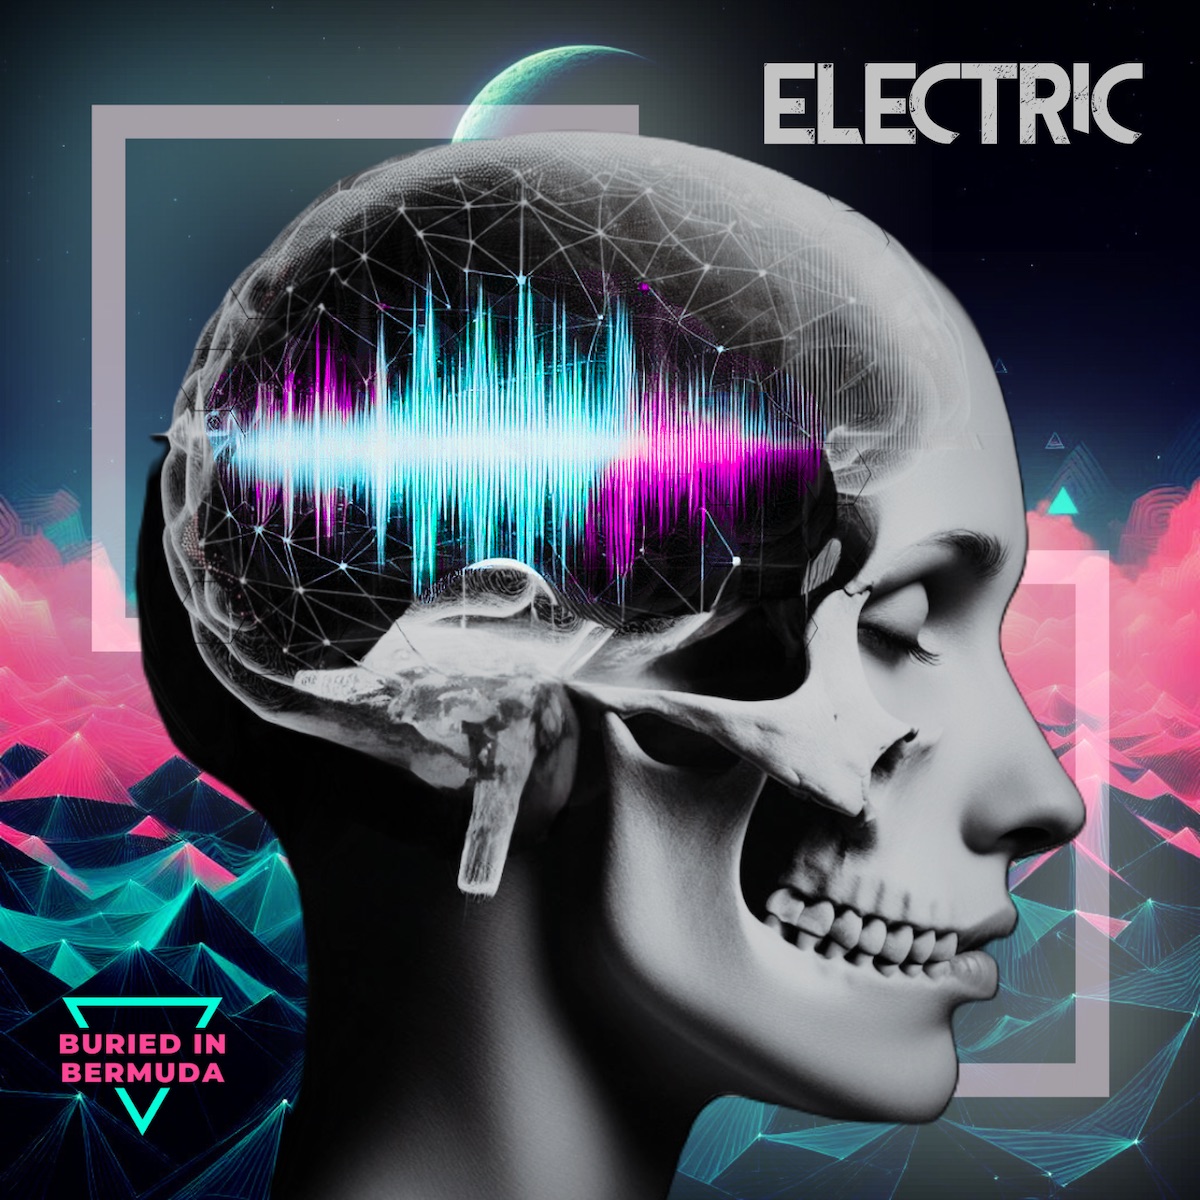 HOT TRACK: “Electric” by Buried in Bermuda